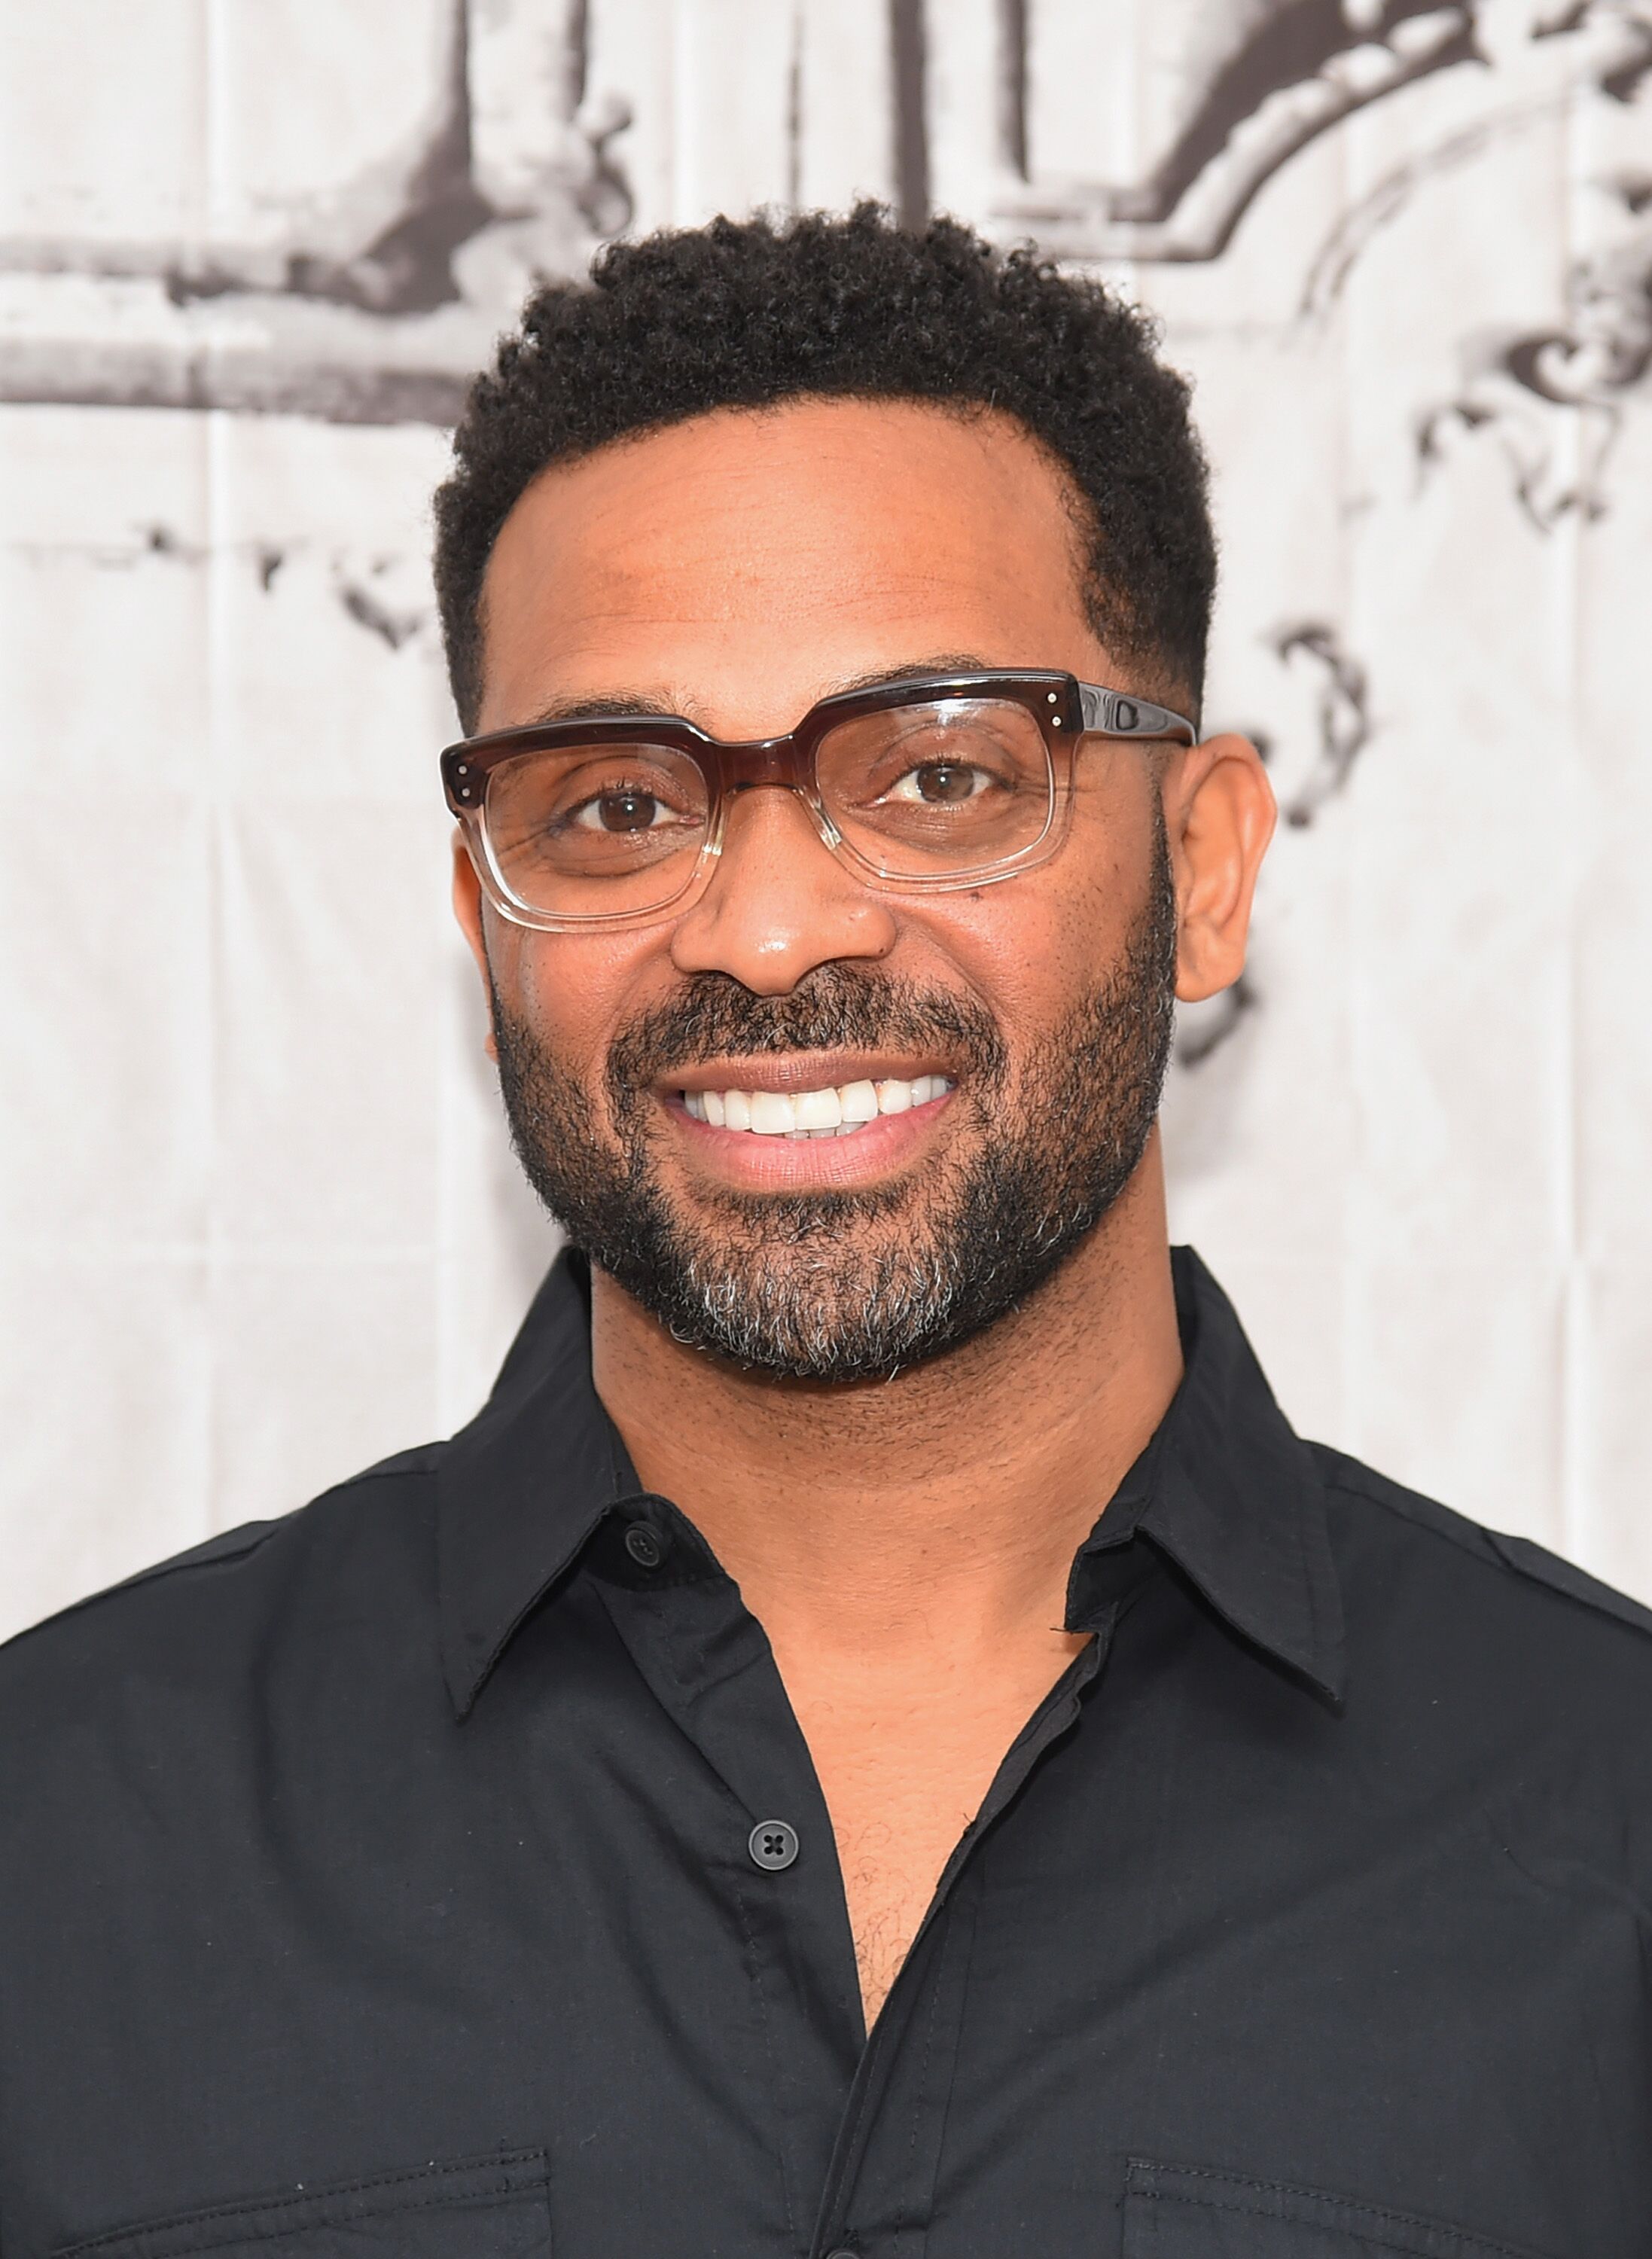 Mike Epps attends the AOL BUILD Speaker Series Presents: "Survivor's Remorse" at AOL Studios in New York on July 29, 2015 | Photo: Getty Images